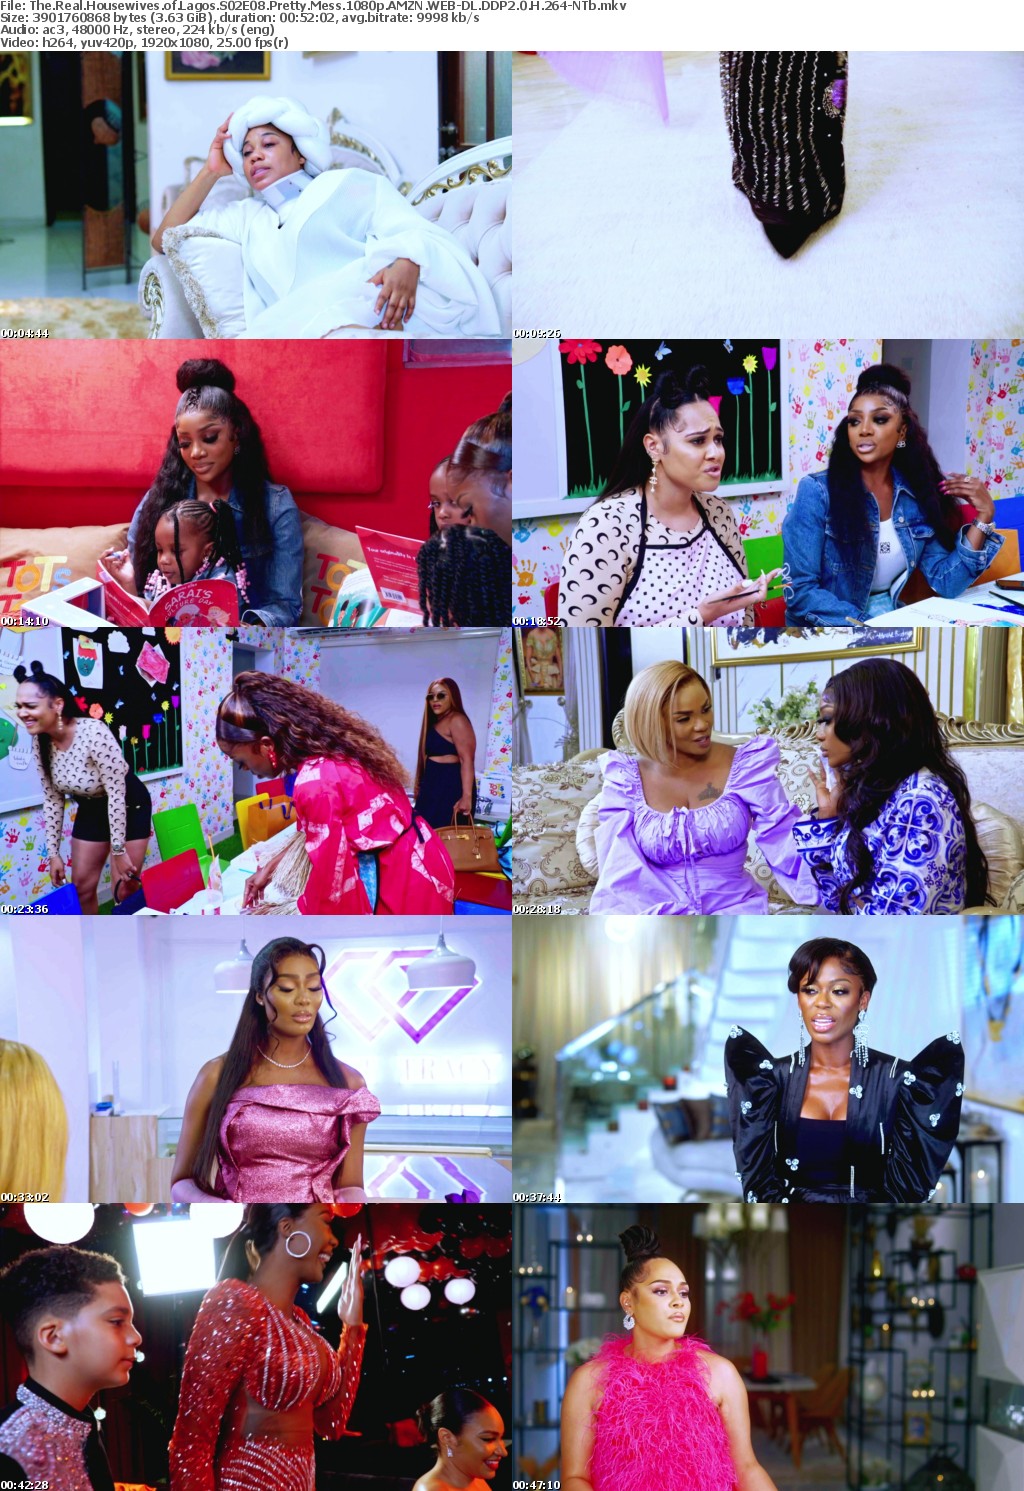 The Real Housewives of Lagos S02E08 Pretty Mess 1080p AMZN WEB-DL DDP2 0 H 264-NTb